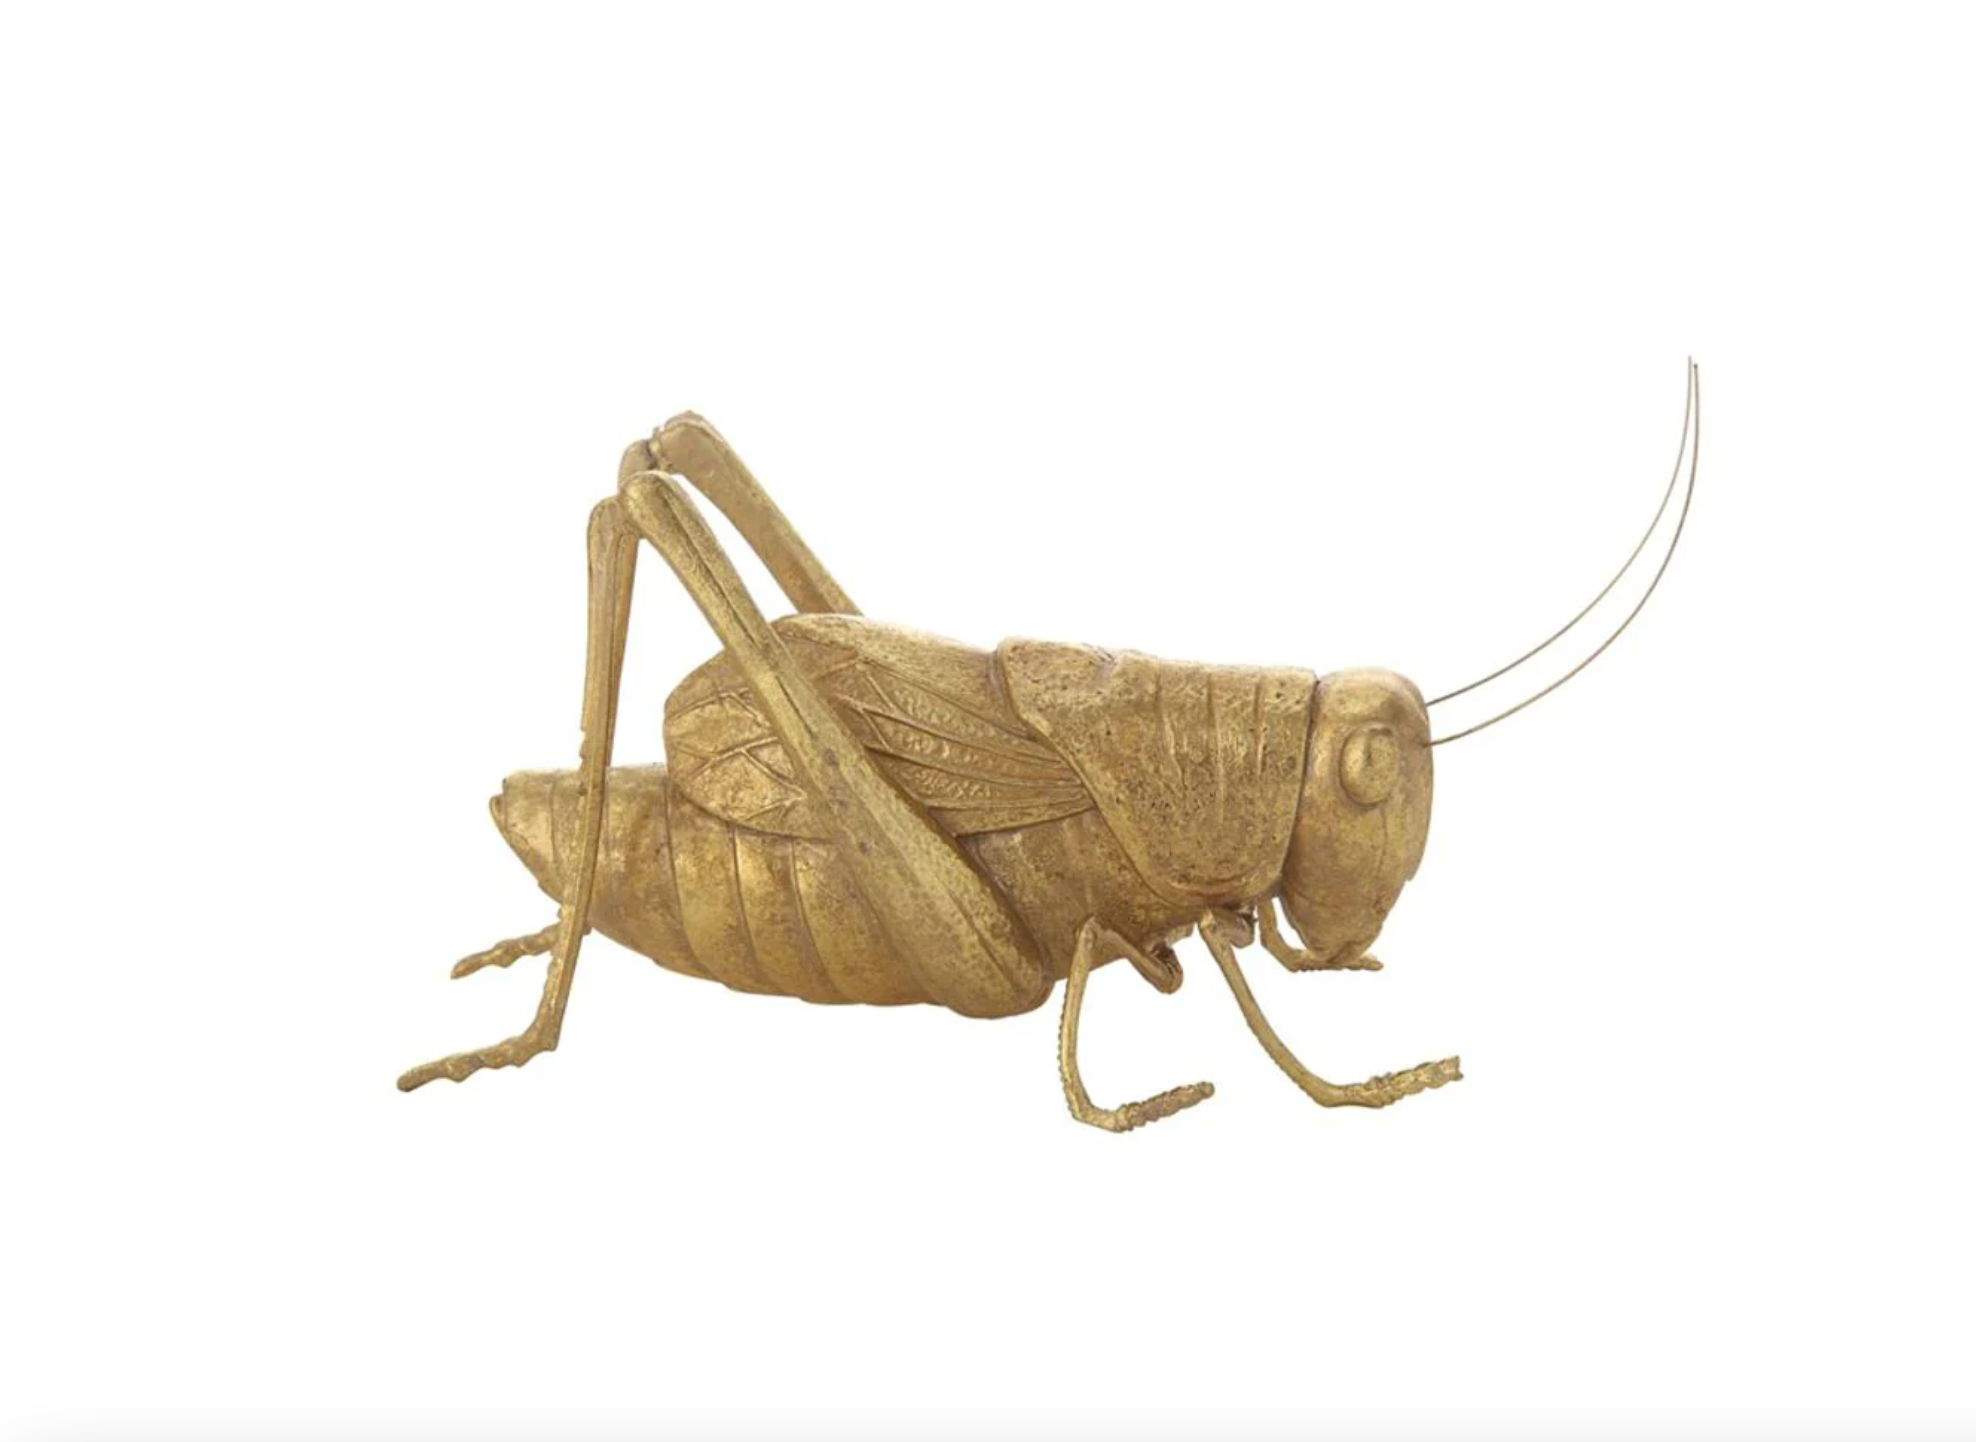 A realistic, gold-colored cricket figurine is depicted against a plain white background. The Gold Resin Cricket from Creative Co-op features detailed textures on its body, legs, antennae, and wings, capturing the intricate anatomy of a cricket. Perfect for enhancing your home decor with a touch of elegance and fortune.